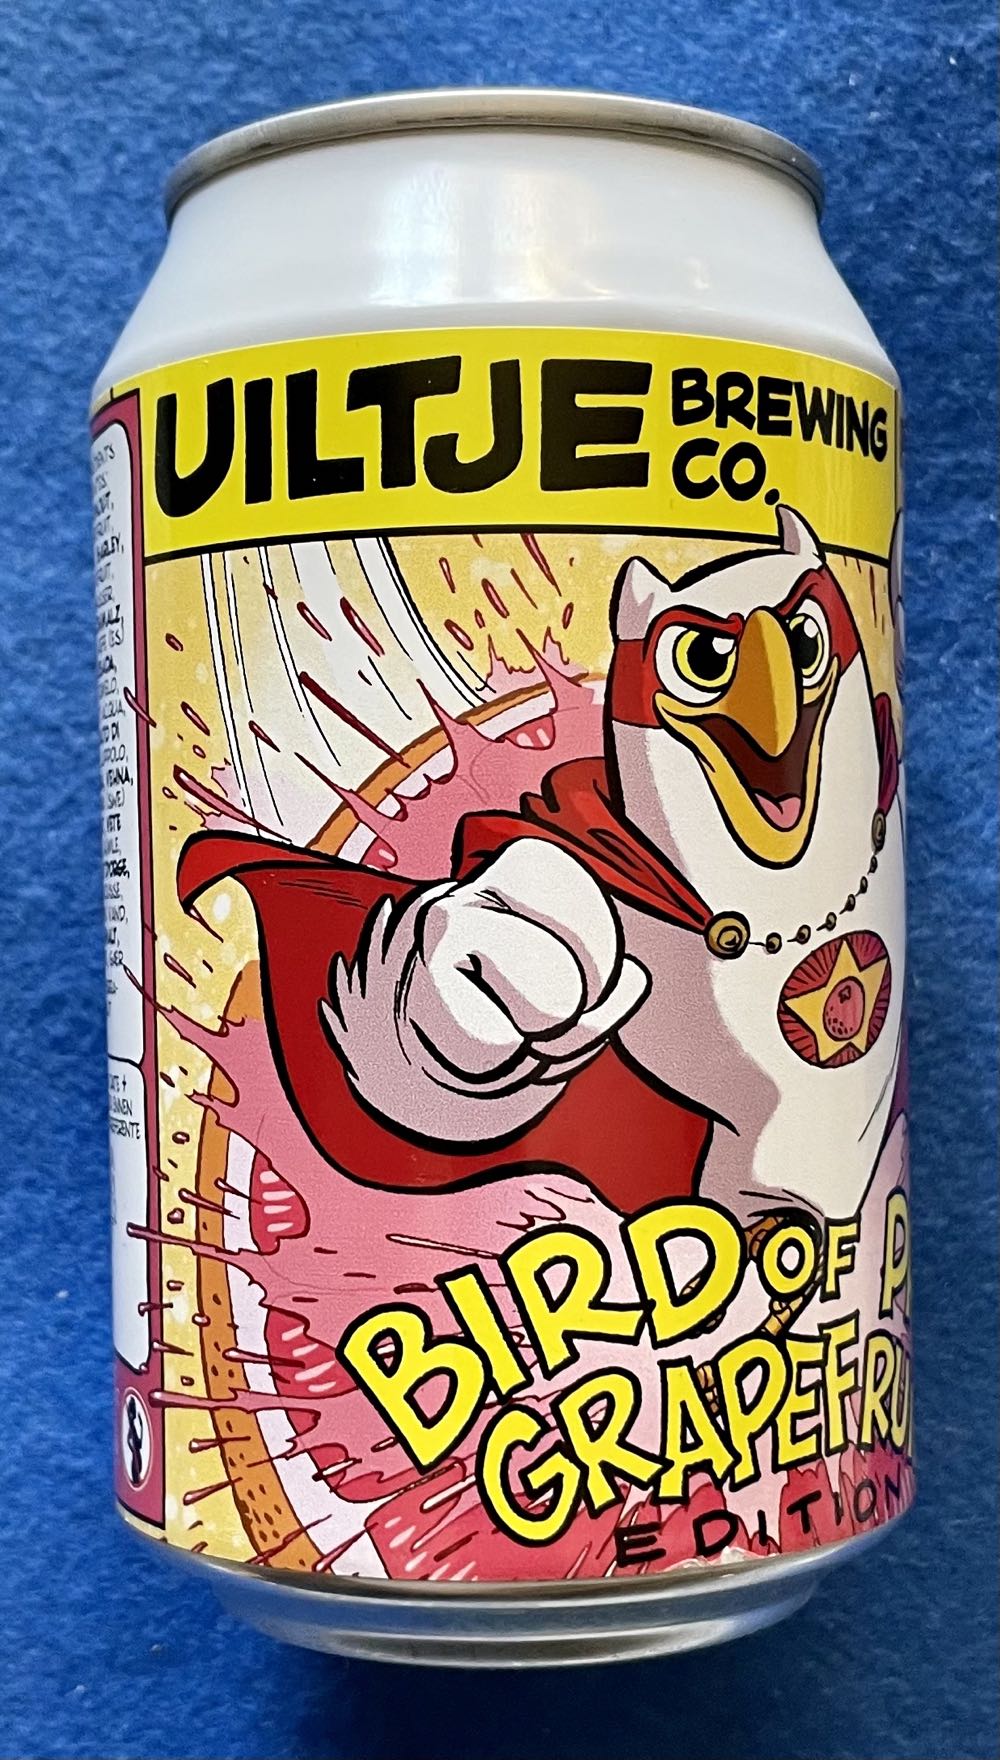 Bird Of Prey Grapefruit Edition - Uiltje Brewing Company (330 mL) alcohol collectible [Barcode 8720254563565] - Main Image 1